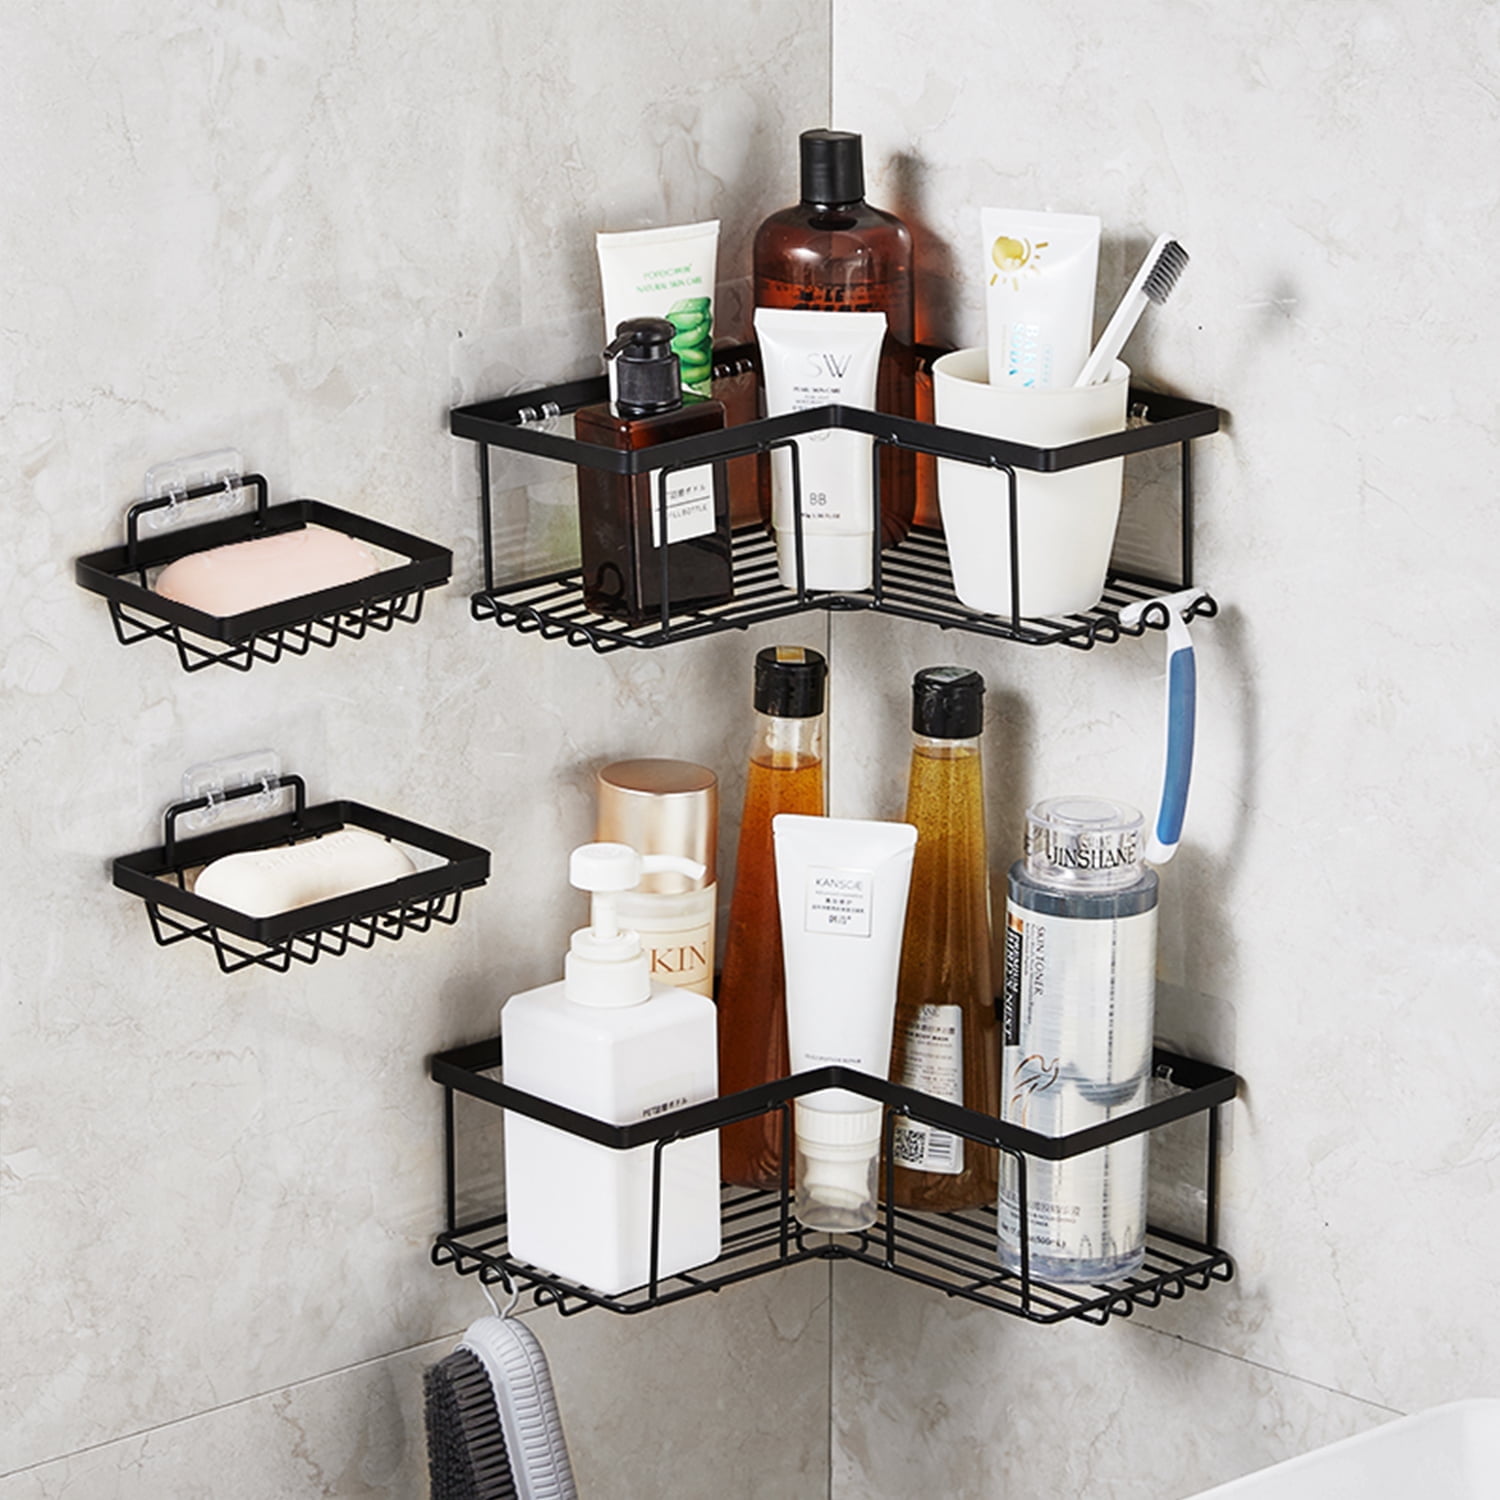 JS HOME Corner Shower Caddy, 3-Pack Shower Organizer Corner Shower Shelf  with Soap Holder and 12 Hooks, No Drilling Adhesive Wall Mounted Shower  Rack